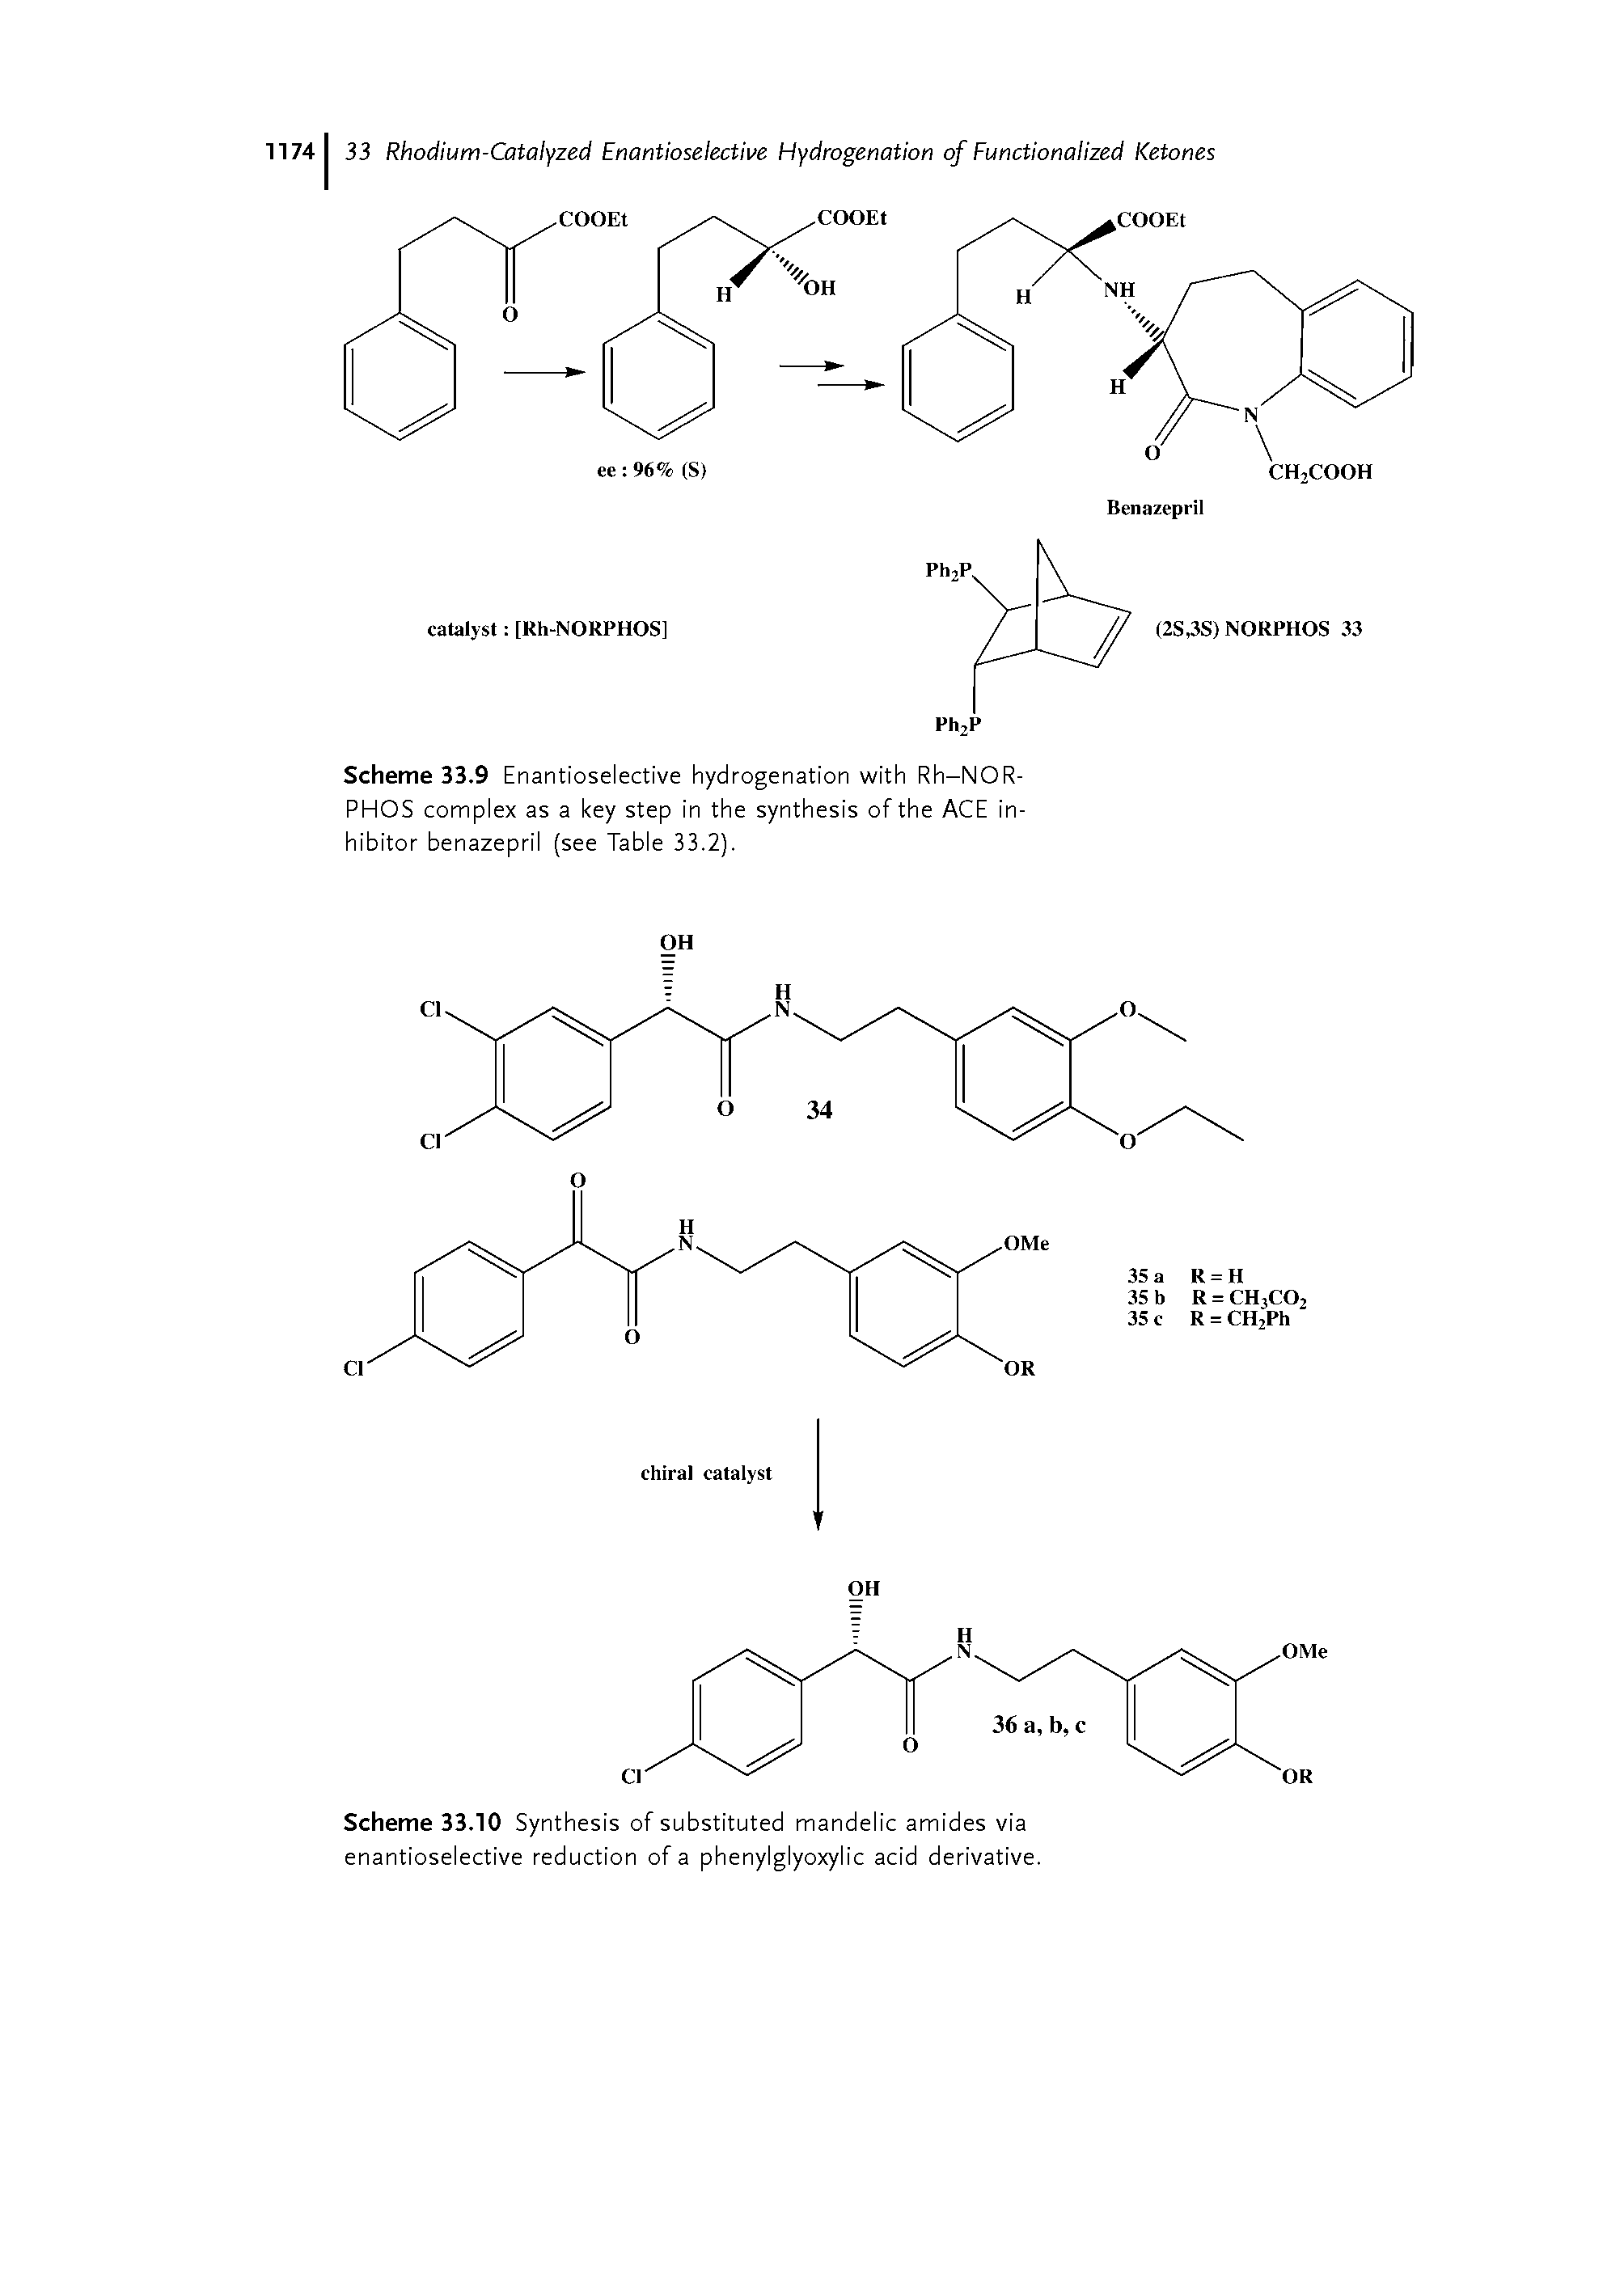 Scheme 33.10 Synthesis of substituted mandelic amides via enantioselective reduction of a phenylglyoxylic acid derivative.